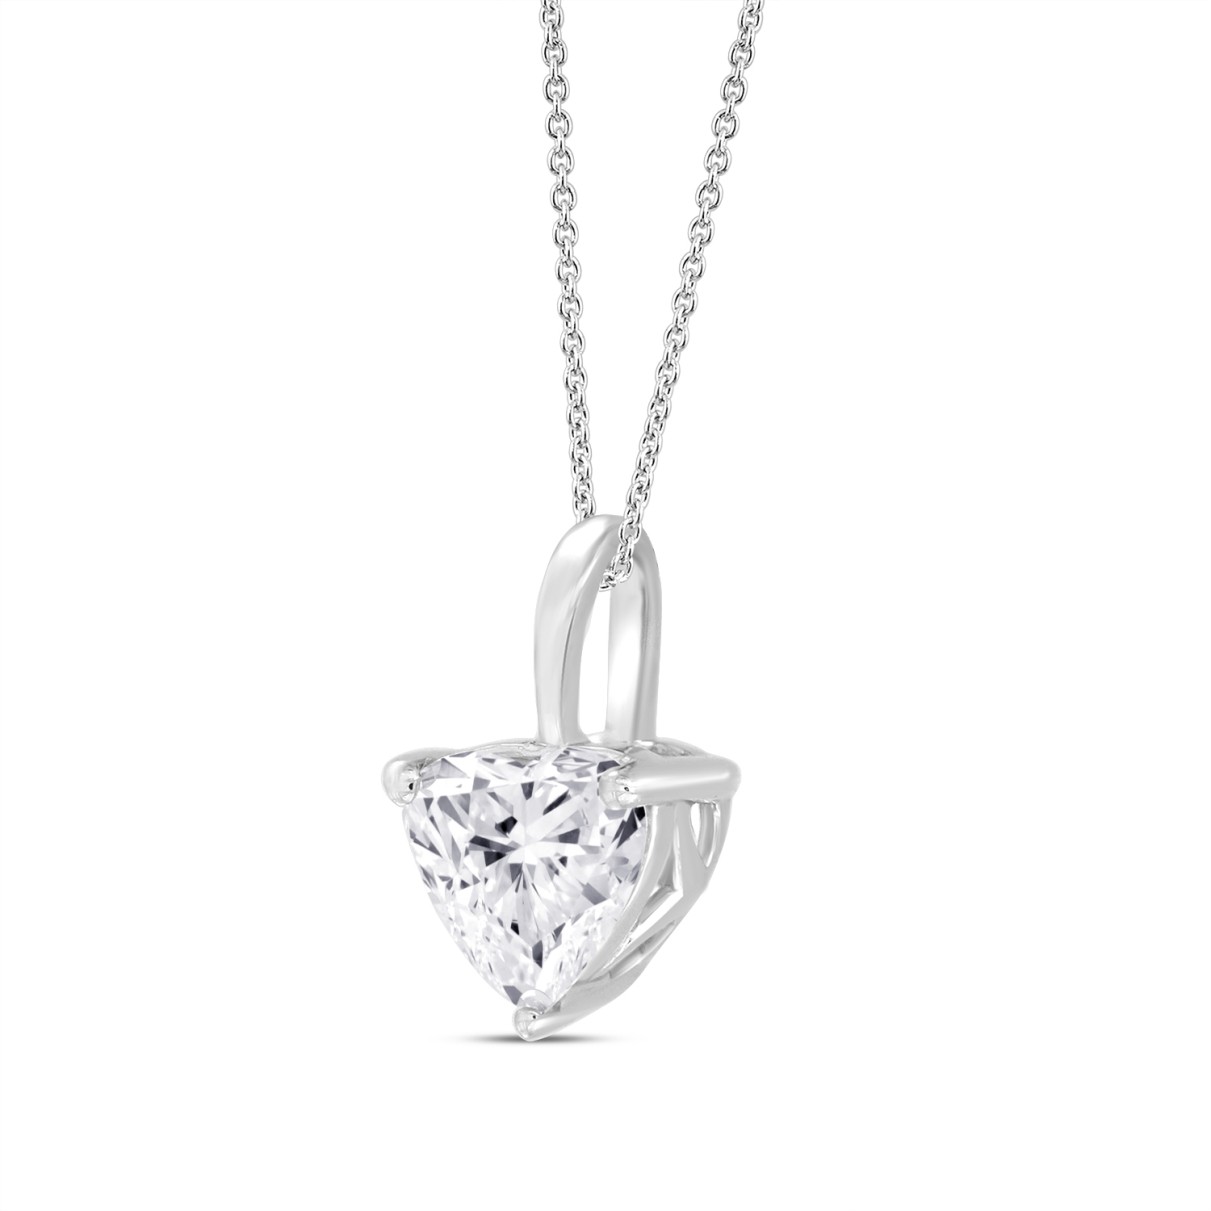 LADIES SOLITAIRE PENDANT WITH CHAIN 3CT HEART DIAMOND 14K WHITE GOLD 